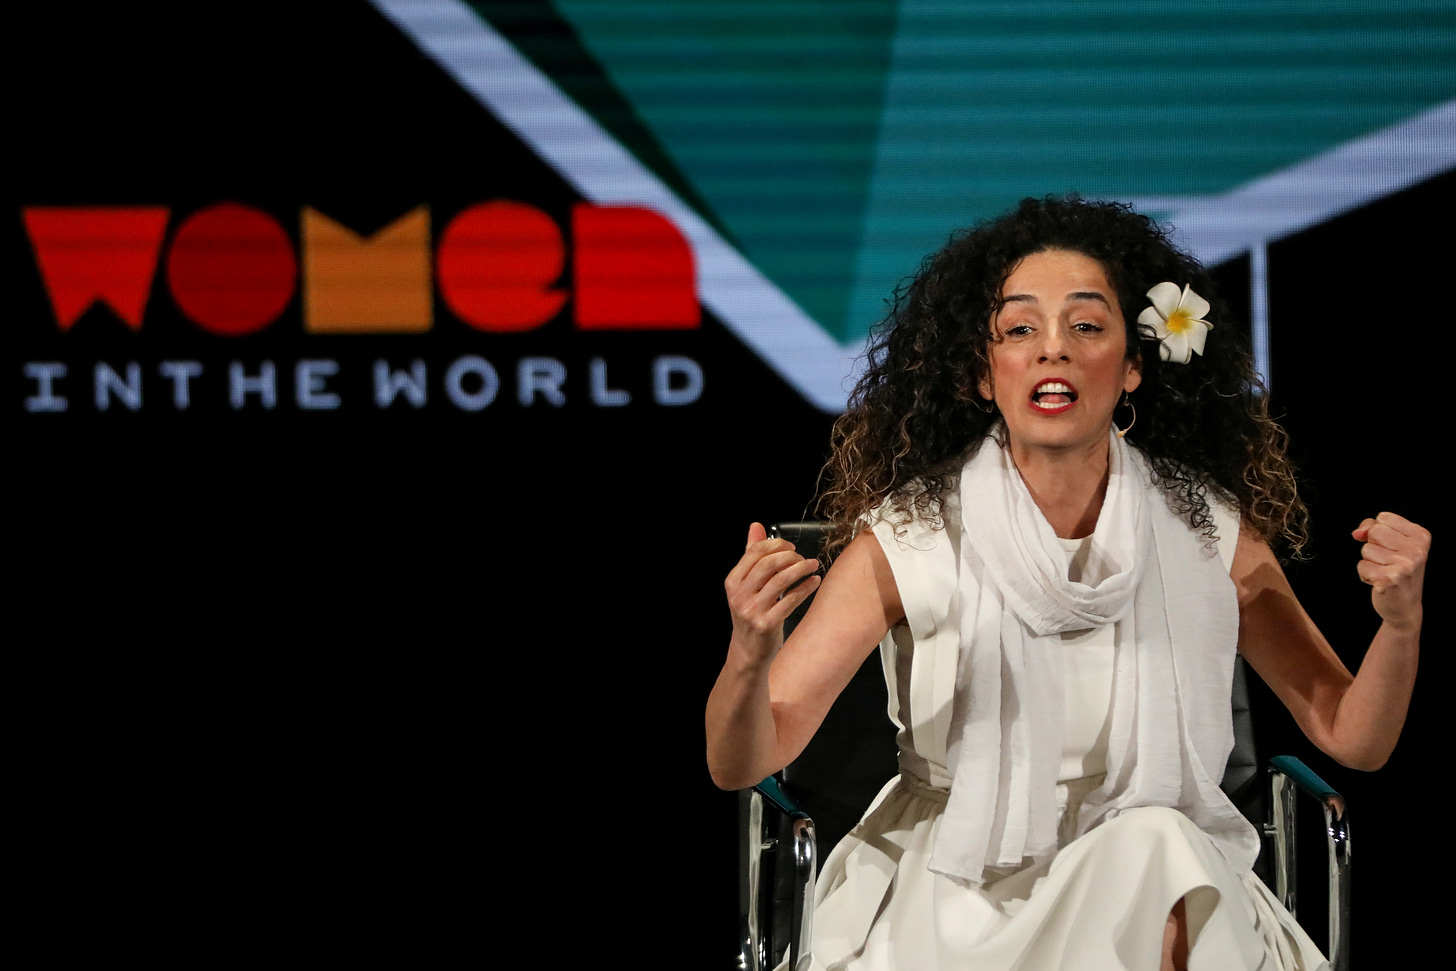 Masih Alinejad, Iranian journalist and women's rights activist, speaks on stage at the Women In The World Summit in New York, U.S, April 12, 2019. REUTERS/Brendan McDermid/File Photo